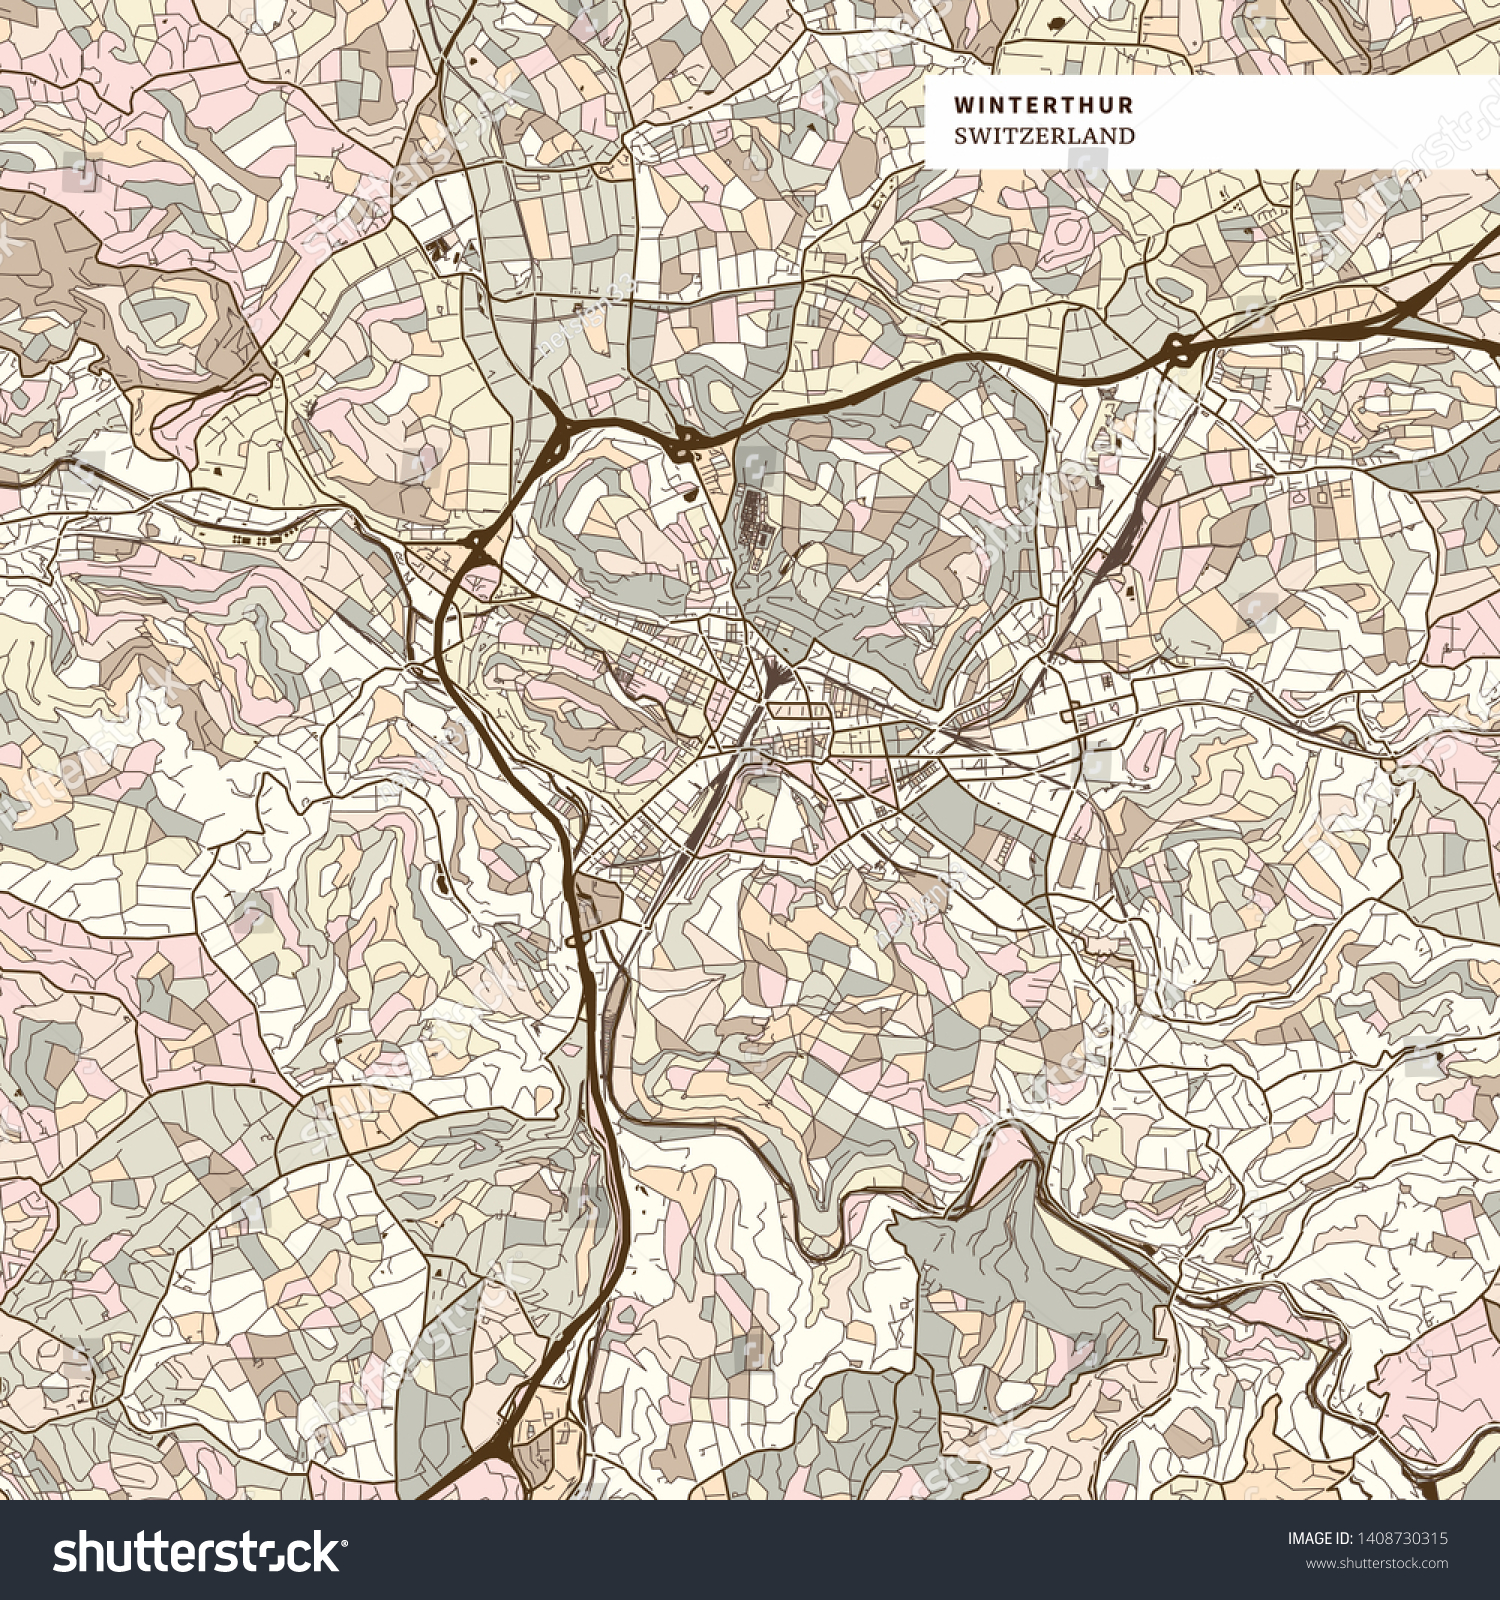 SVG of Map of Winterthur, brown colored version for Apps, Print or web backgrounds svg